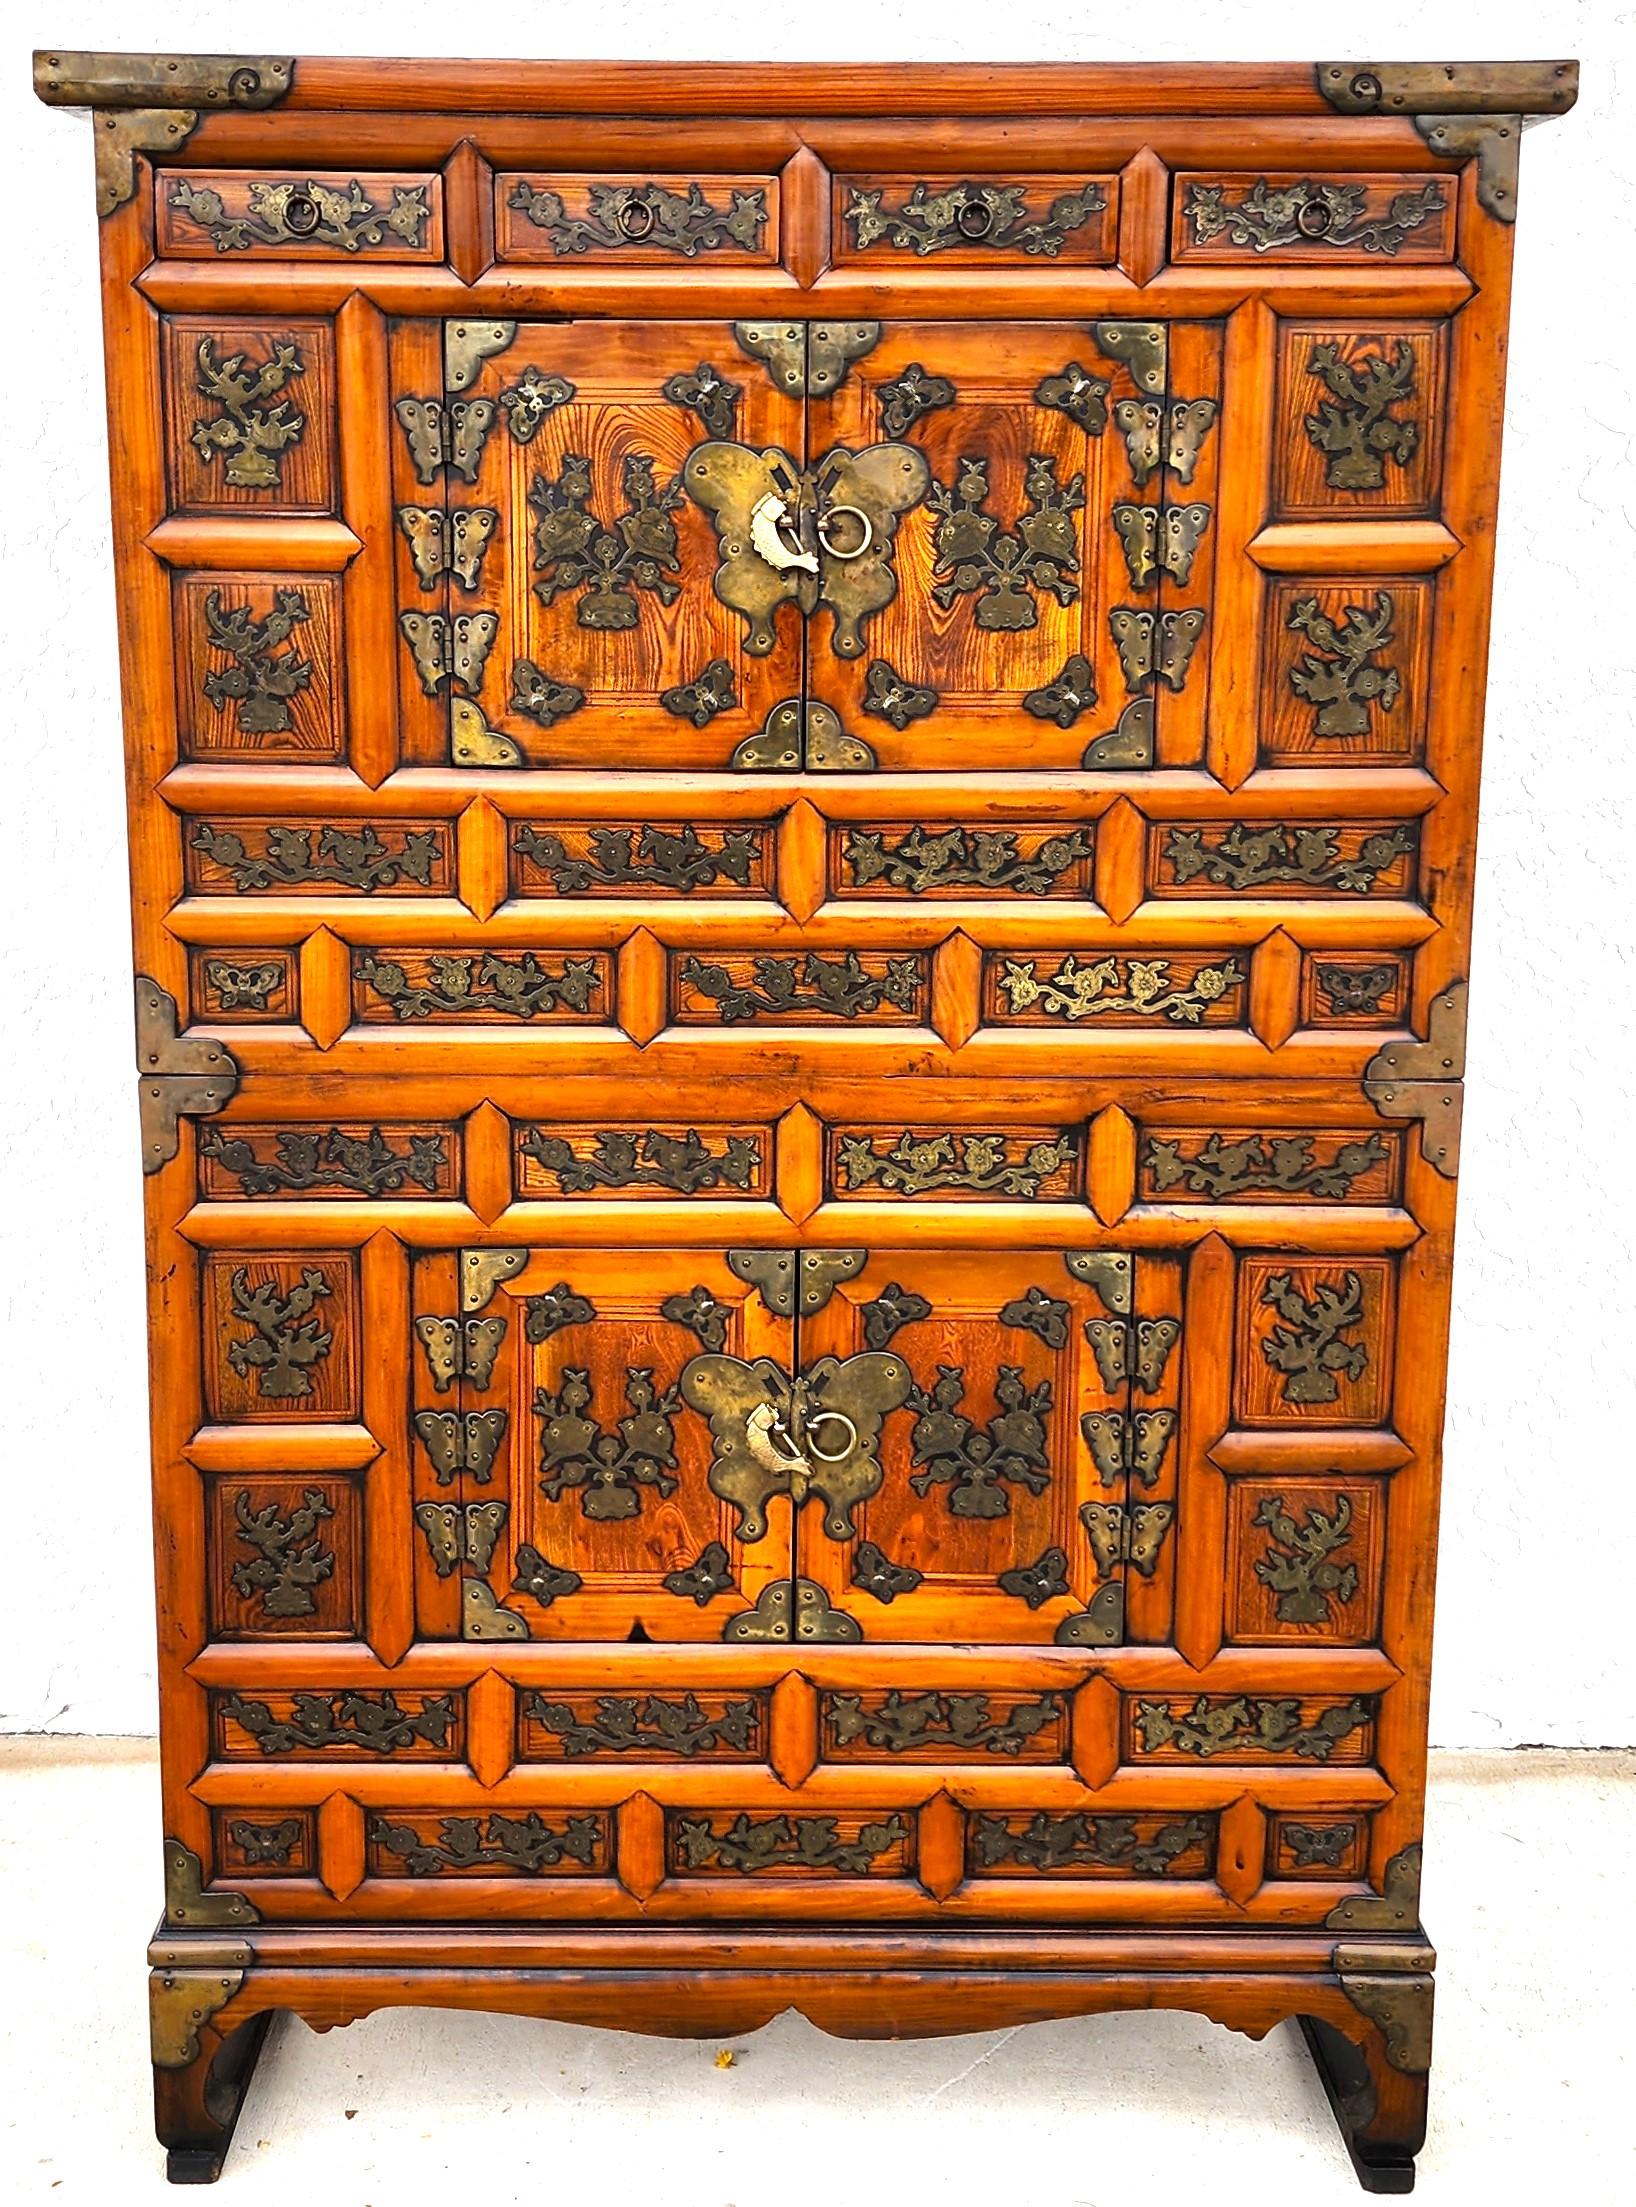 For FULL item description click on CONTINUE READING at the bottom of this page.

Offering One Of Our Recent Palm Beach Estate Fine Furniture Acquisitions Of An
Antique Korean Elm & Brass Bound Bandaji Nong Tansu Scholars Chest Wedding Cabinet
Early